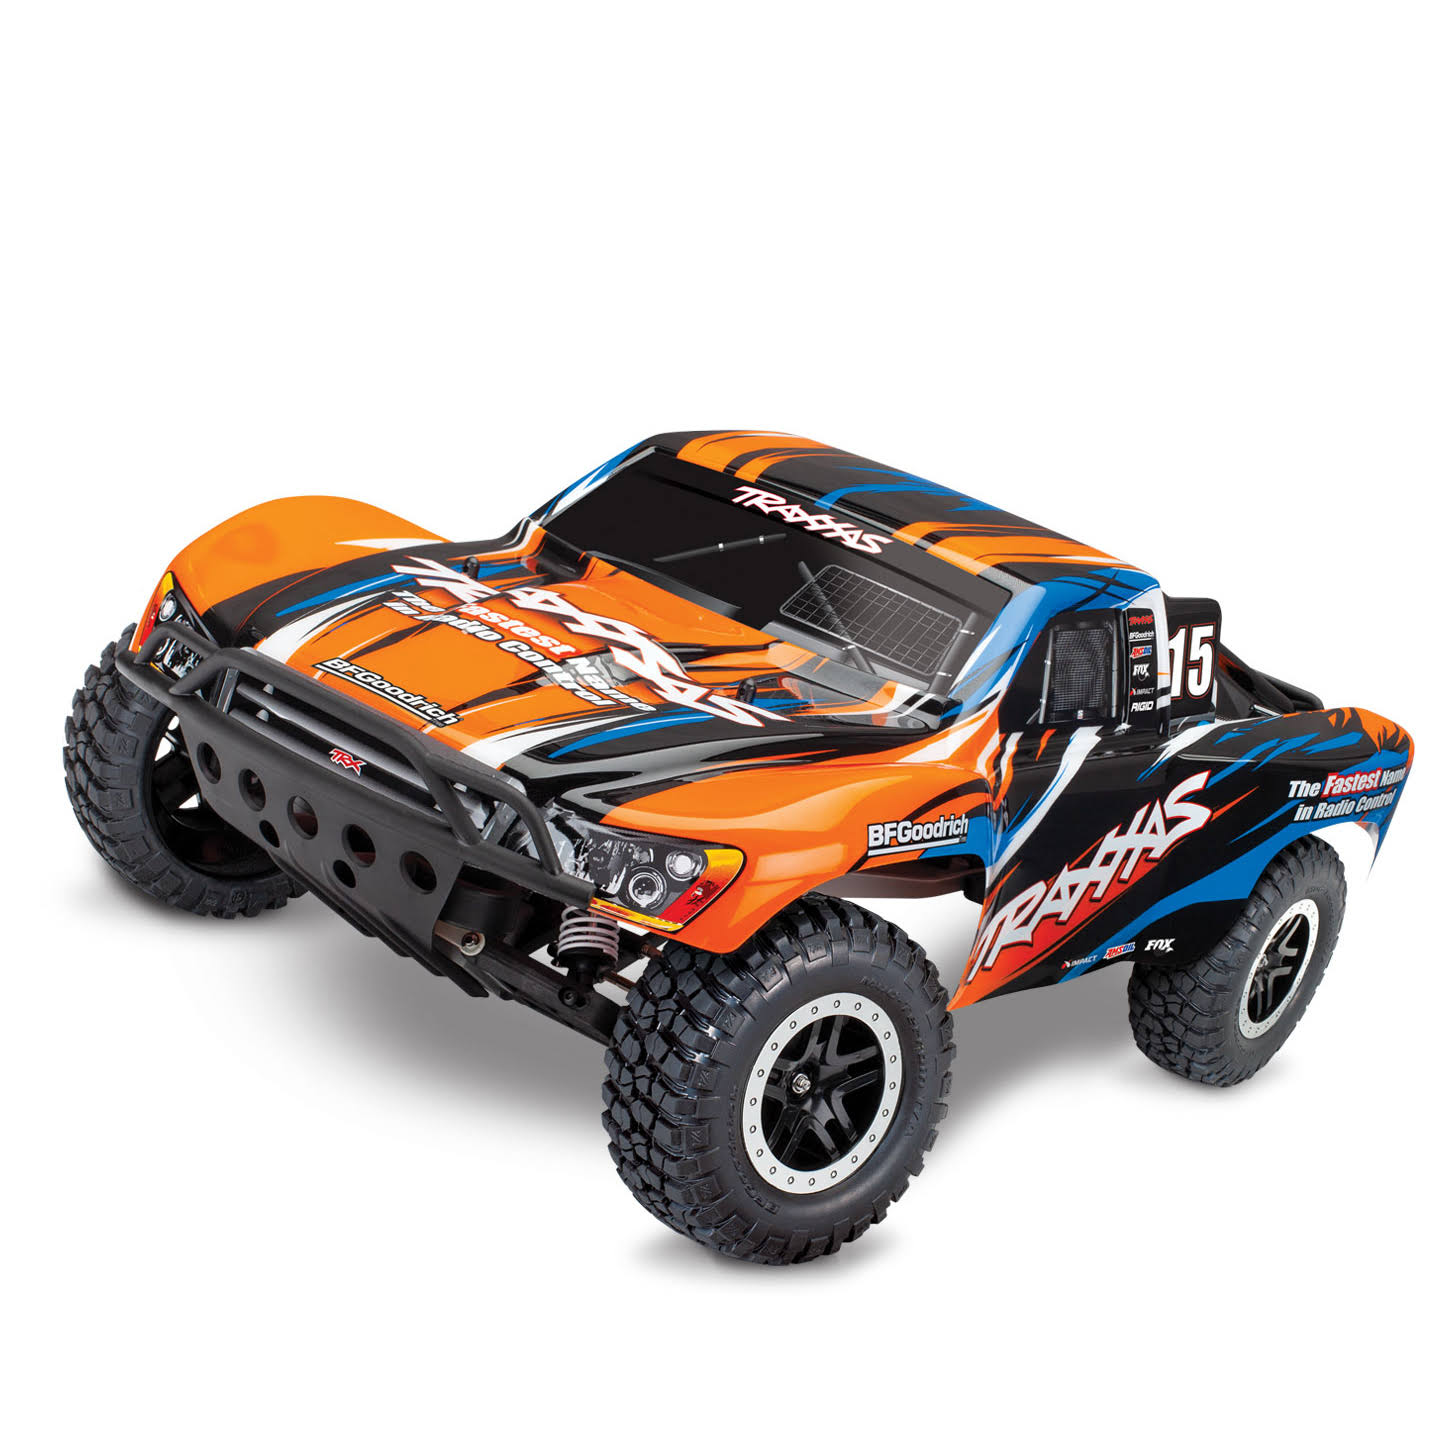 Traxxas 580764orng Scale 1-10 Slash Vxl Pro Brushless Rtr Short Course Truck Traxxas